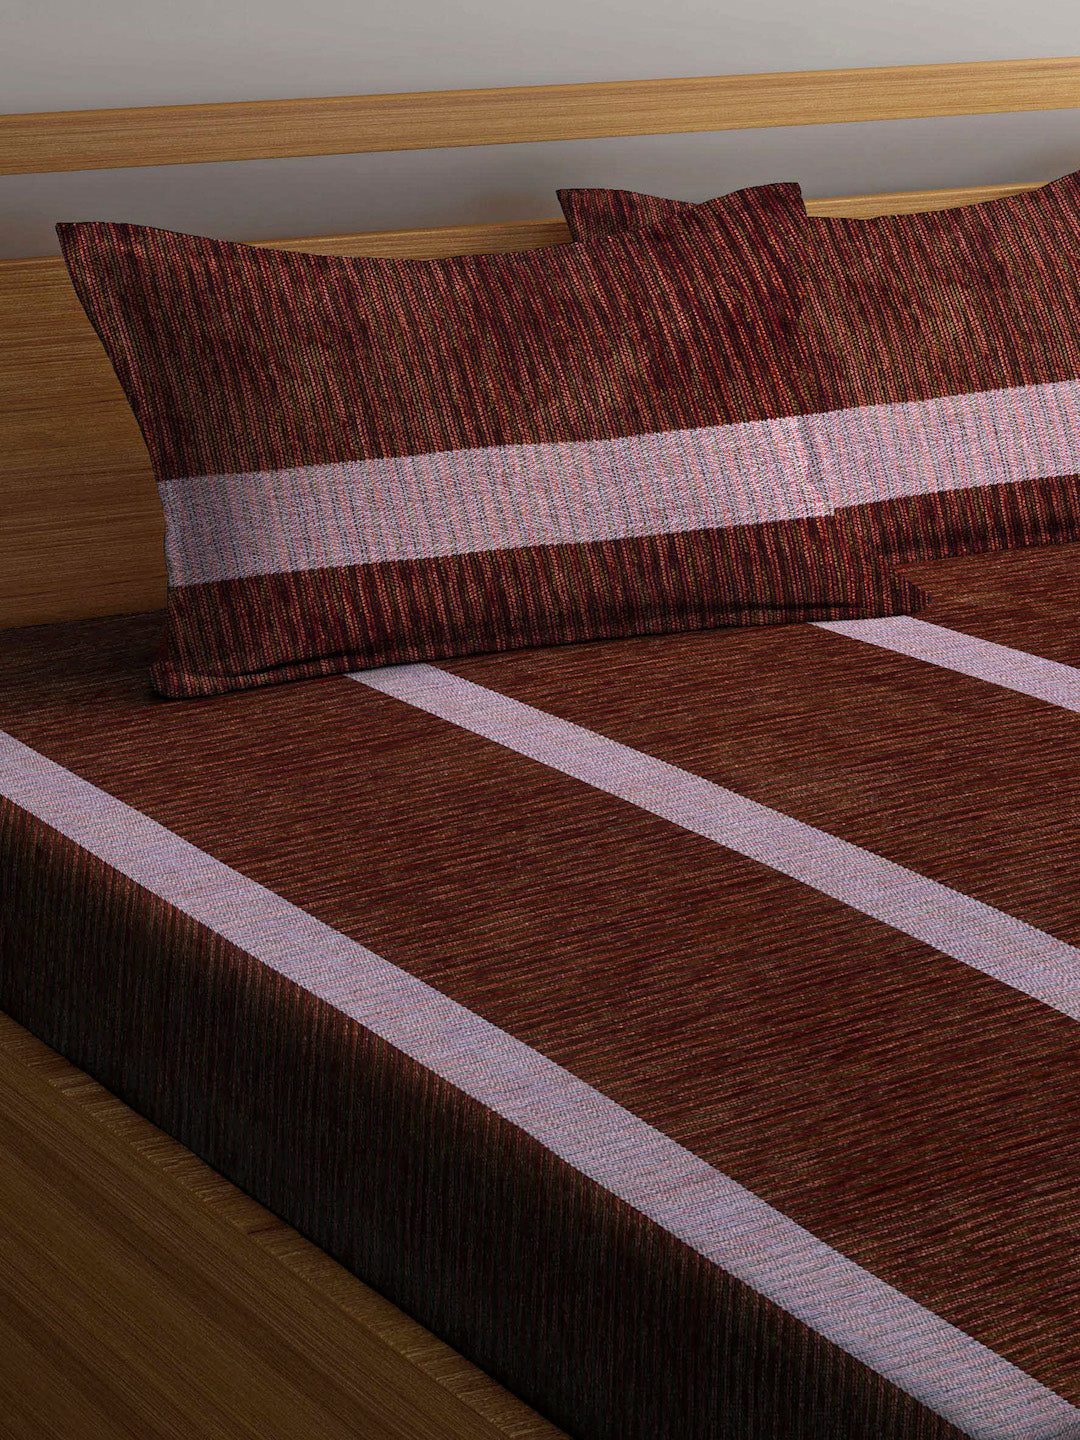 Arrabi Brown Stripes Handwoven Cotton King Size Bedsheet with 2 Pillow Covers (260 X 230 cm)